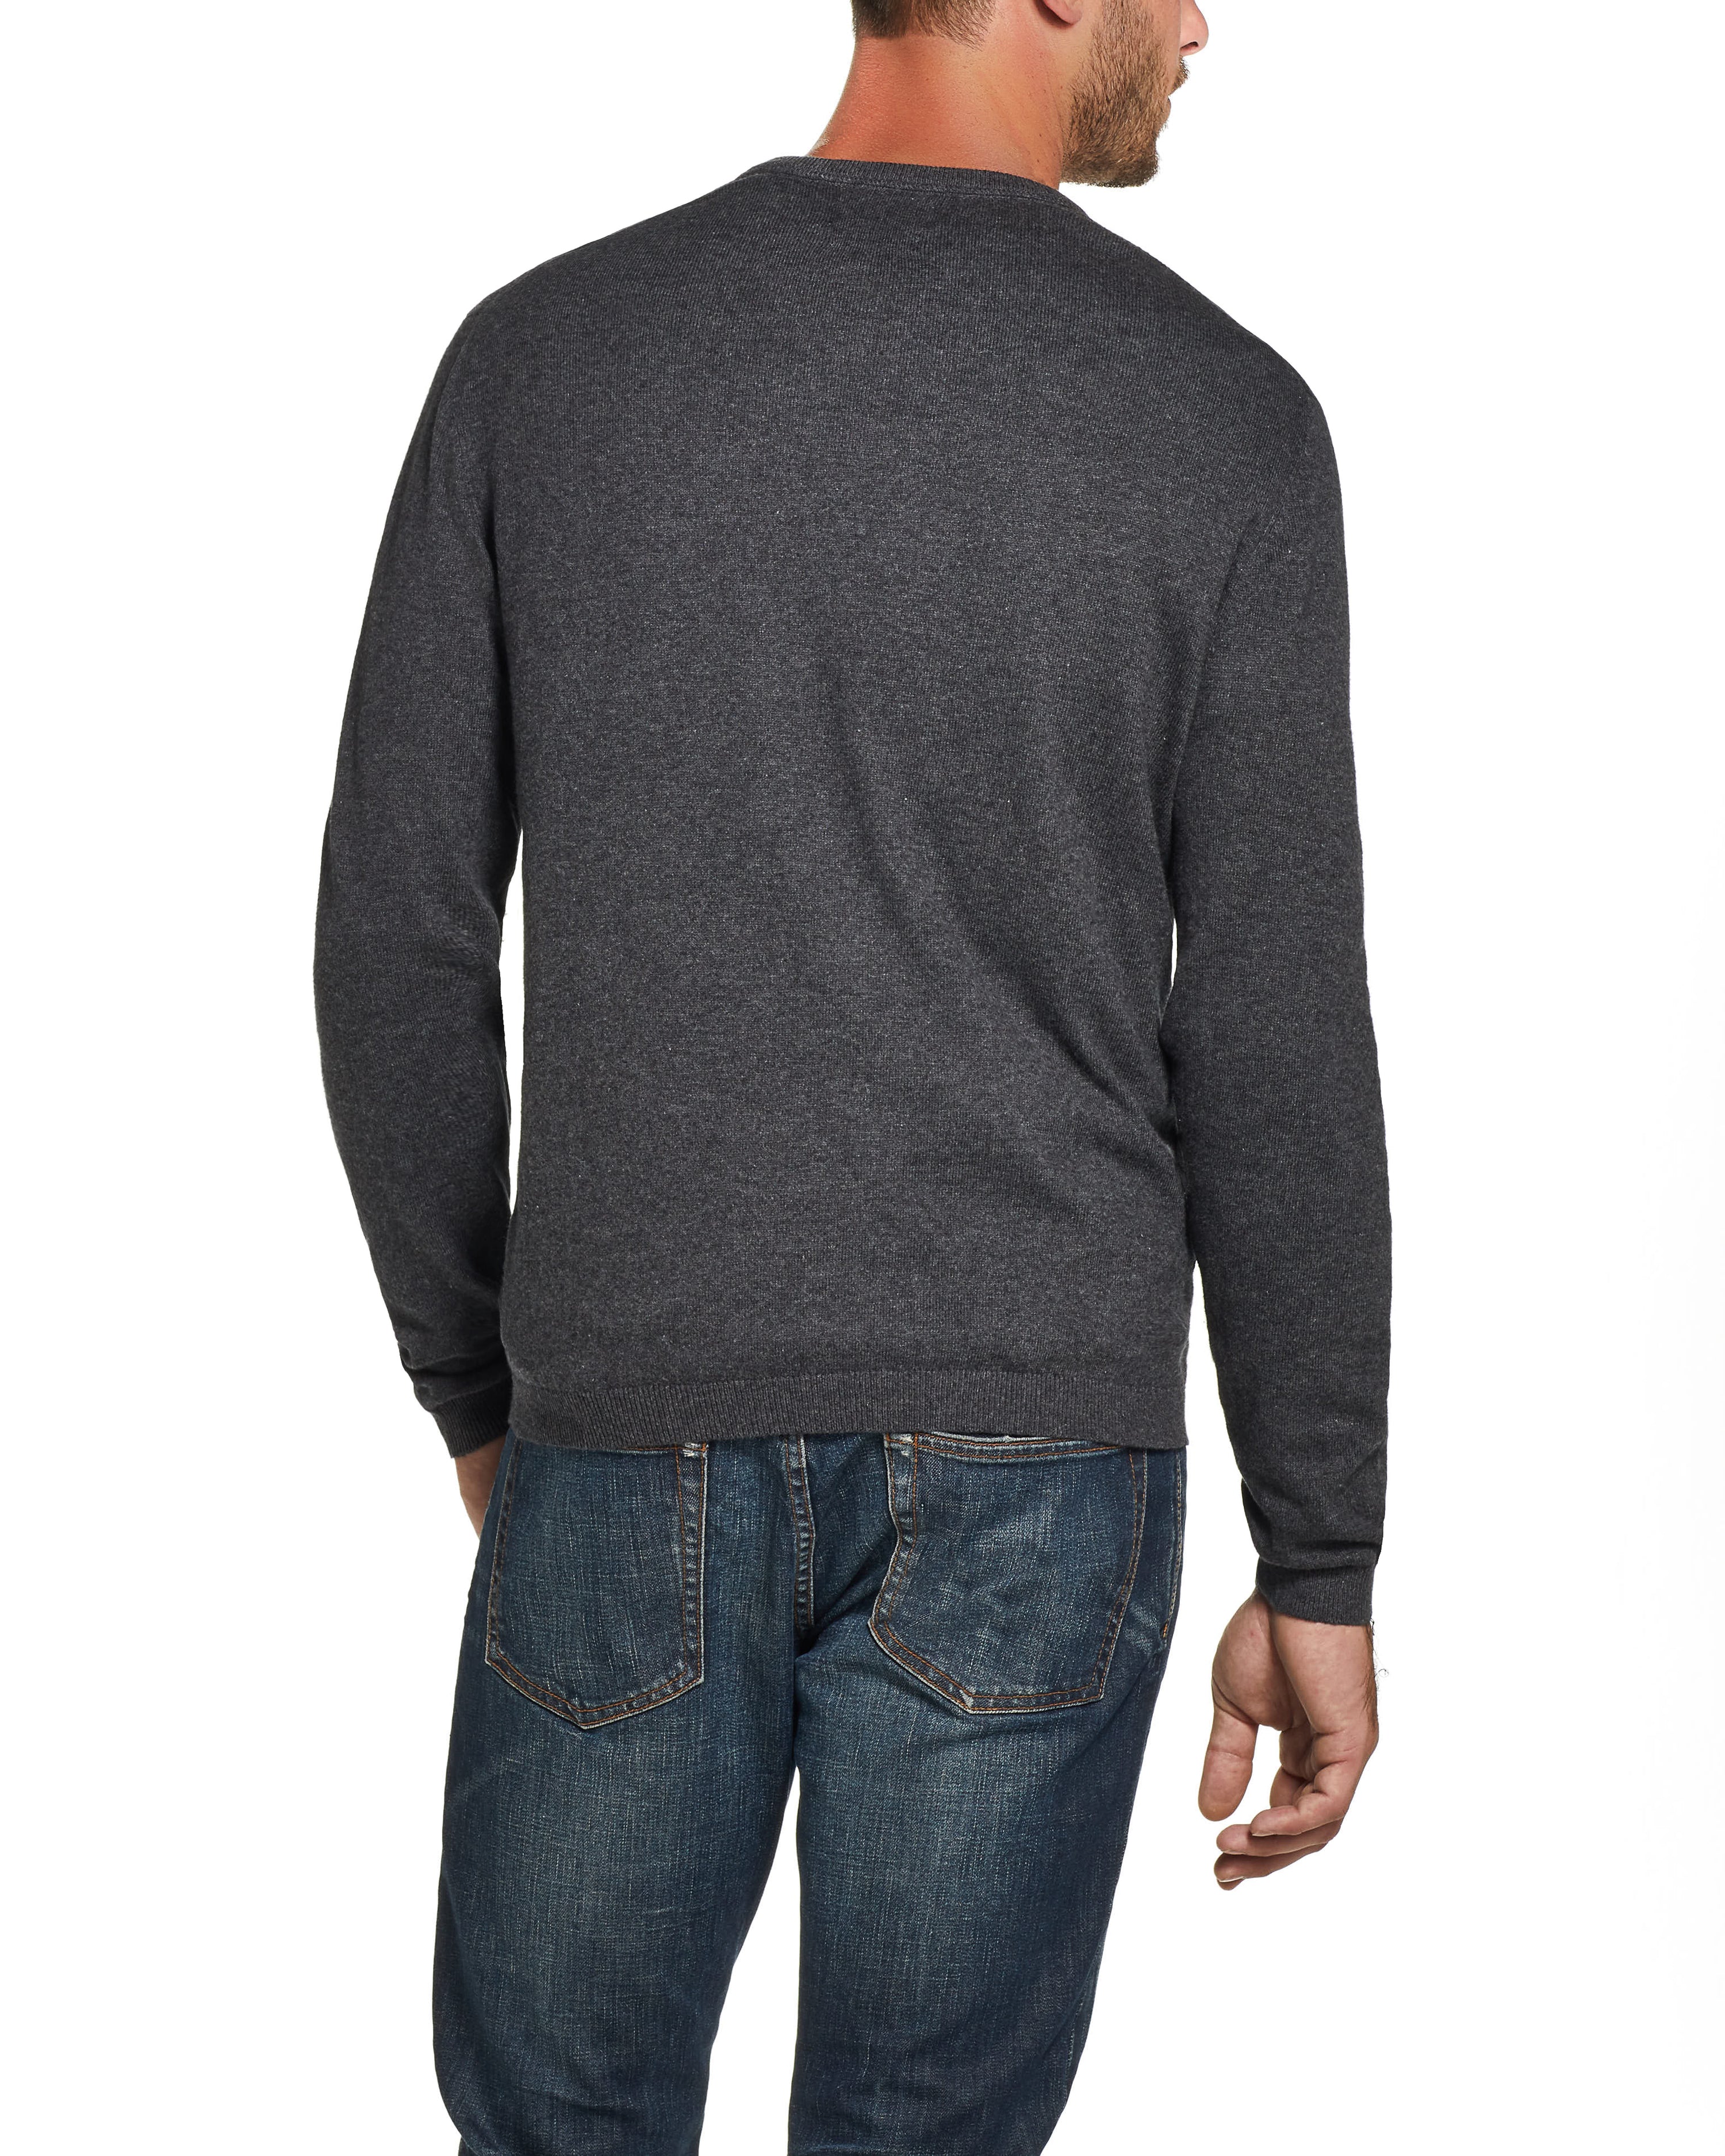 Cotton Cashmere V Neck Sweater in Charcoal Heather